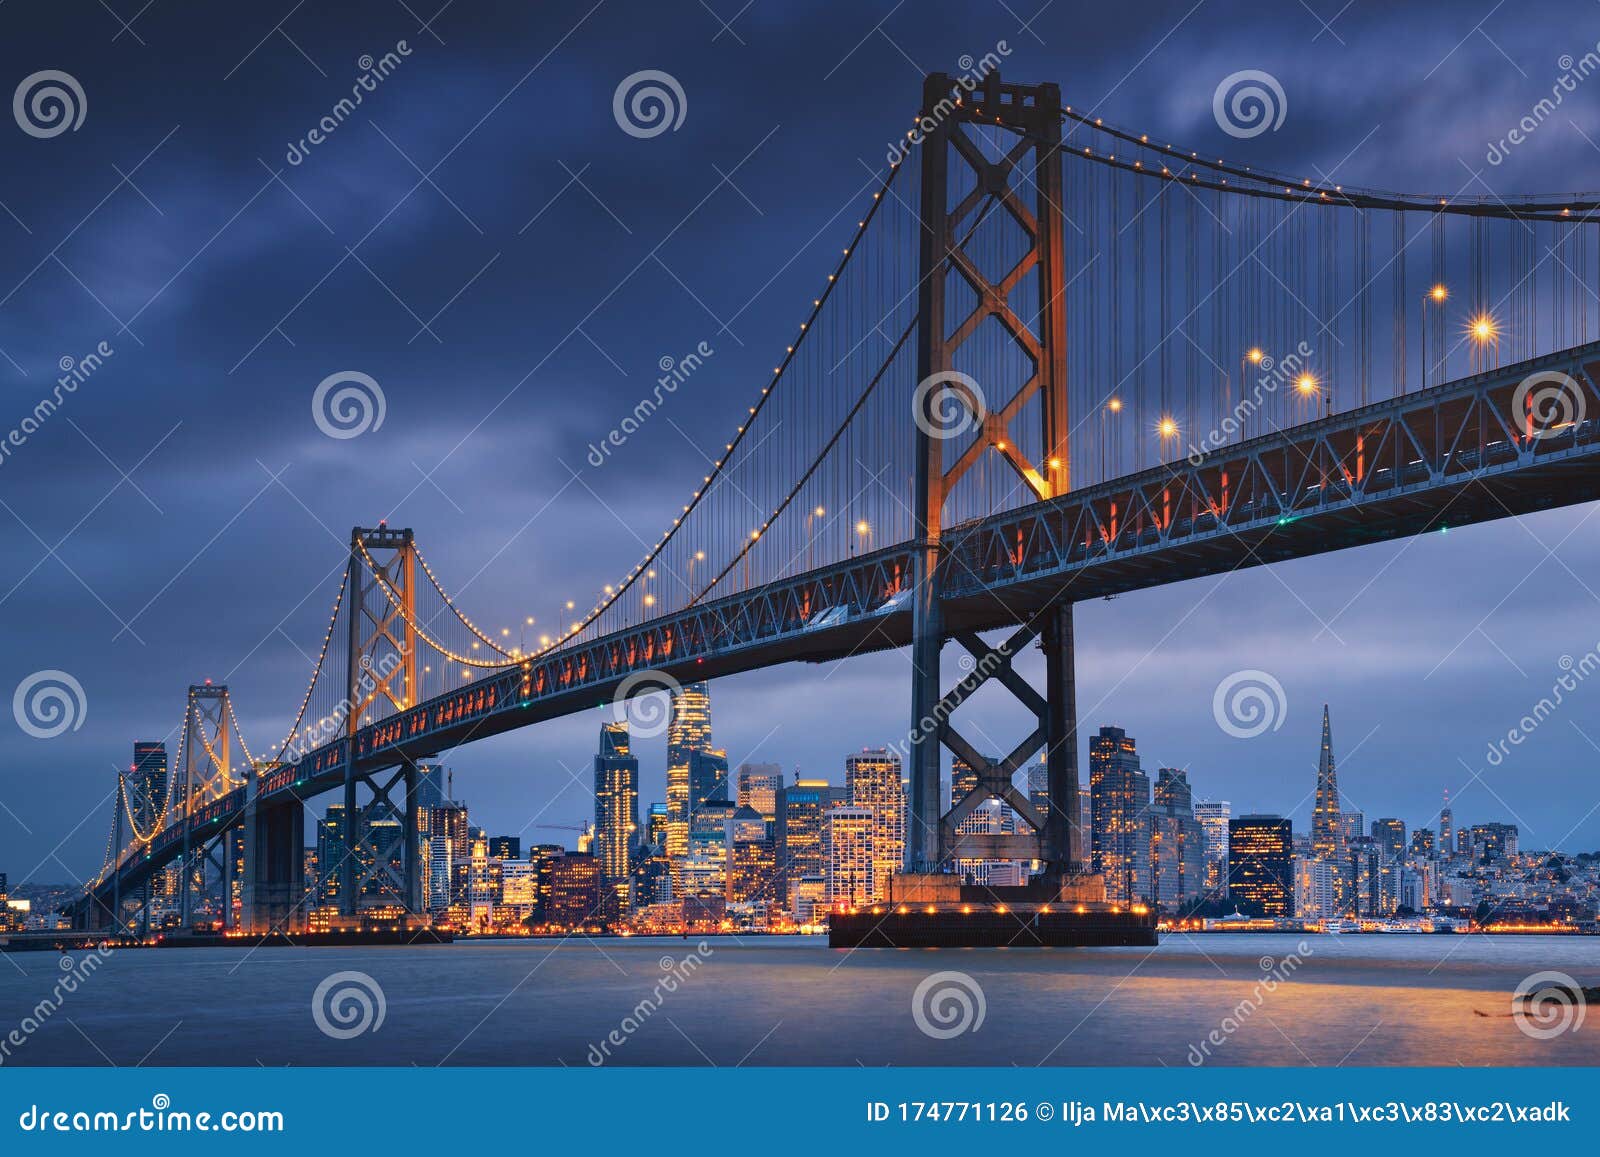 san francisco downtown with oakland bridge in foreground. california famous city sf. travel destination usa